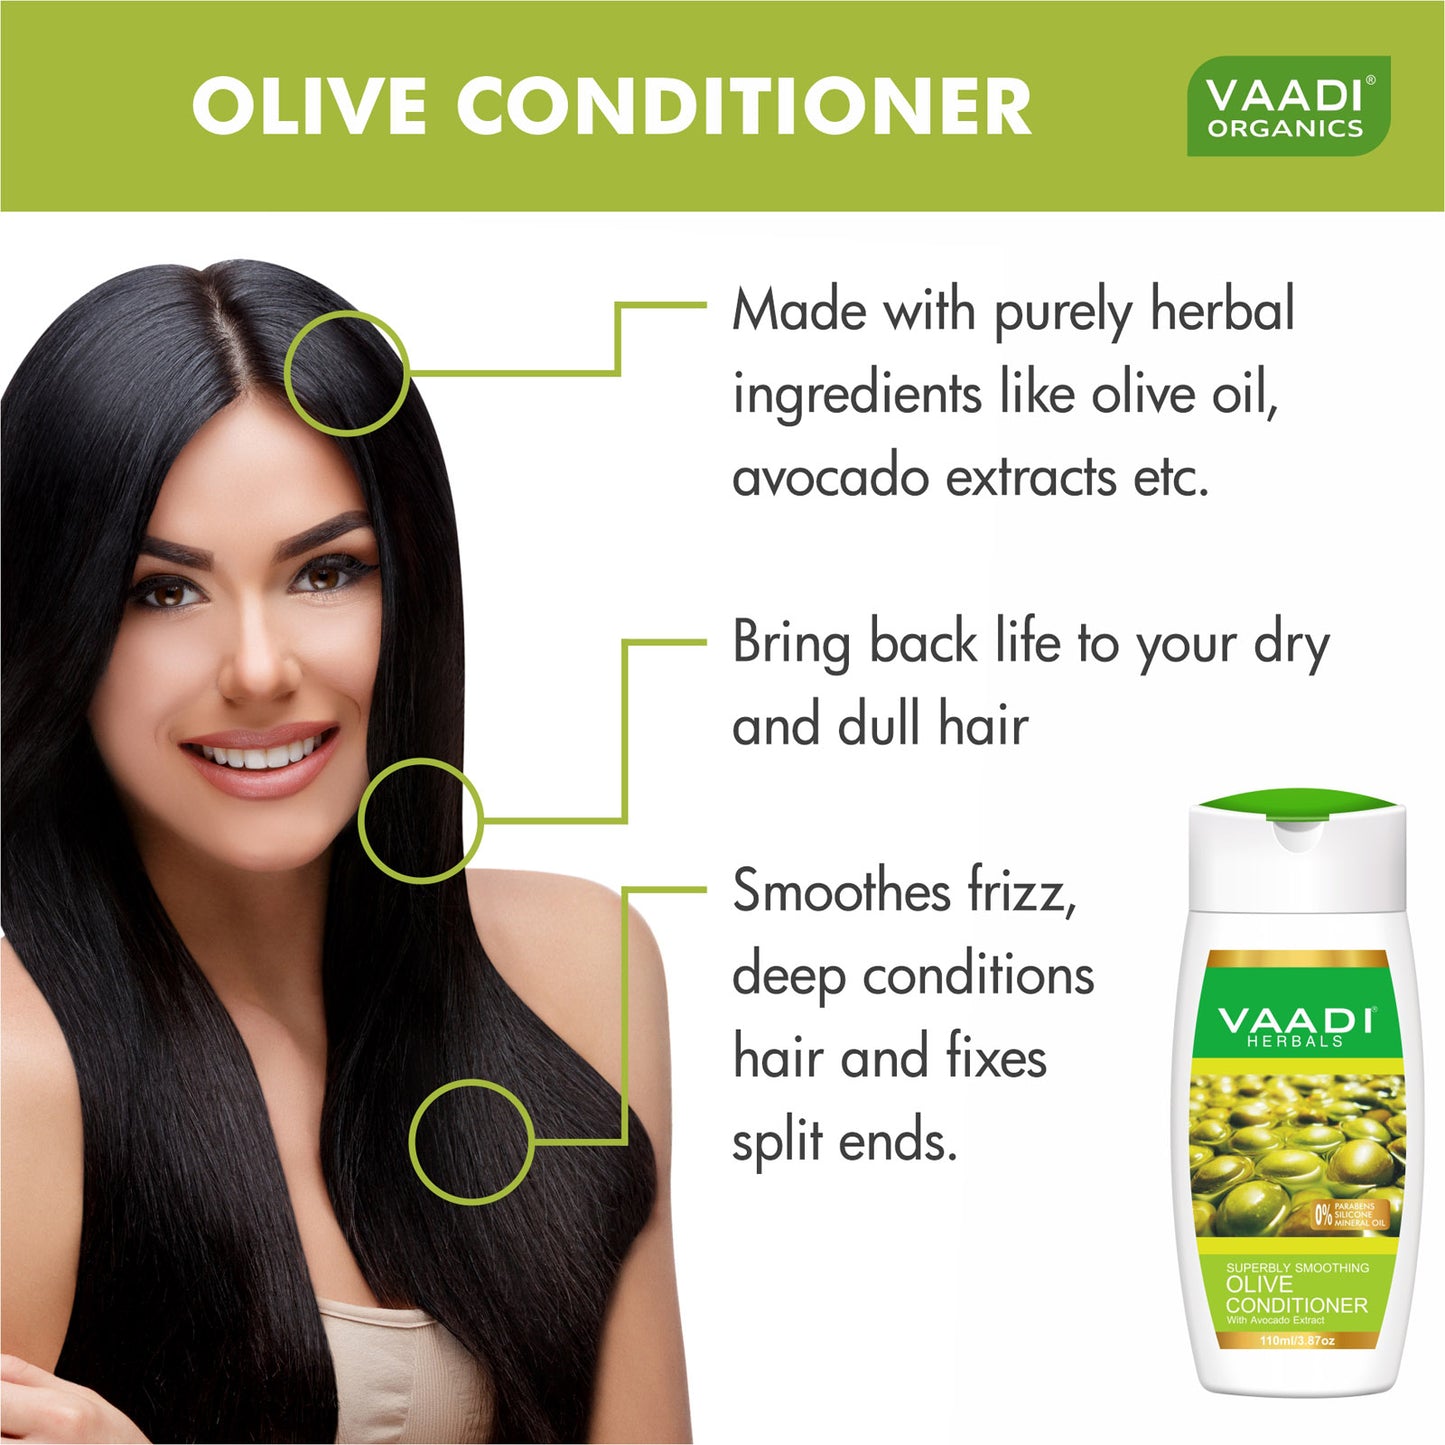 Olive Conditioner With Avocado Extract (110 ml)